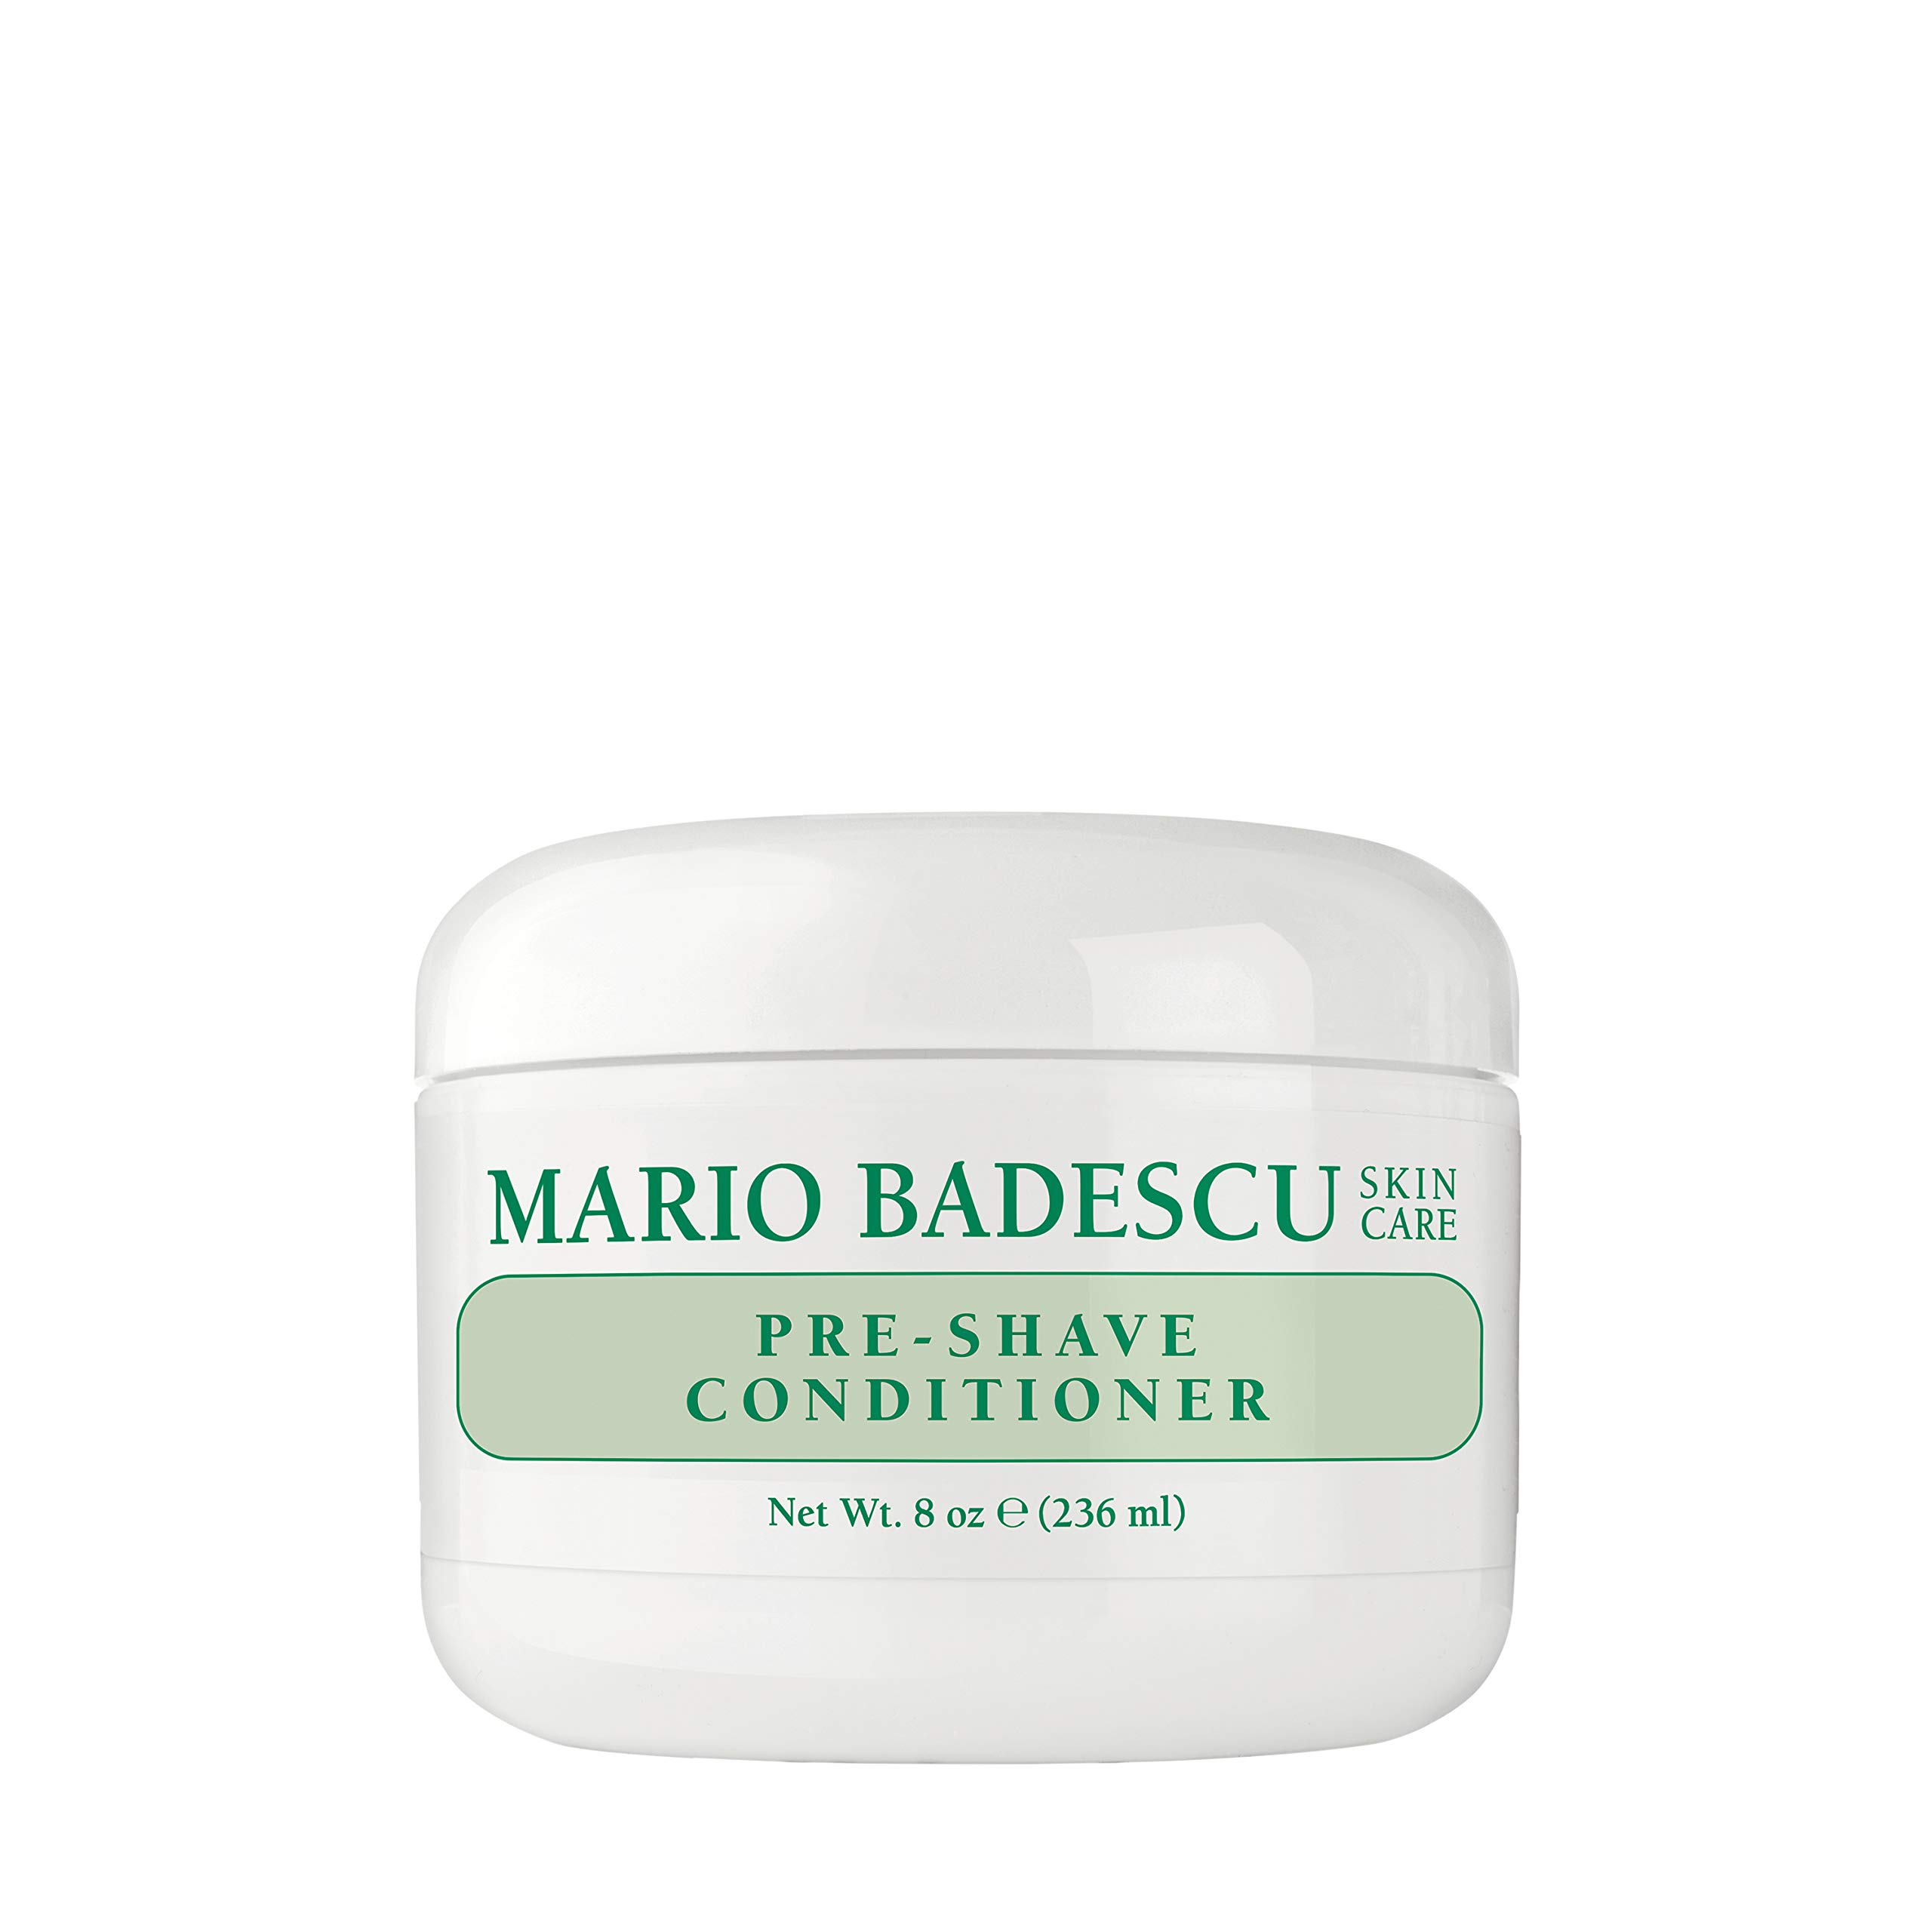 Mario Badescu Pre-Shave Conditioner | Soothing, Botanical-infused Pre Shave Gel for Your Best Shave Yet | Preps, Primes, and Softens Skin and Hair